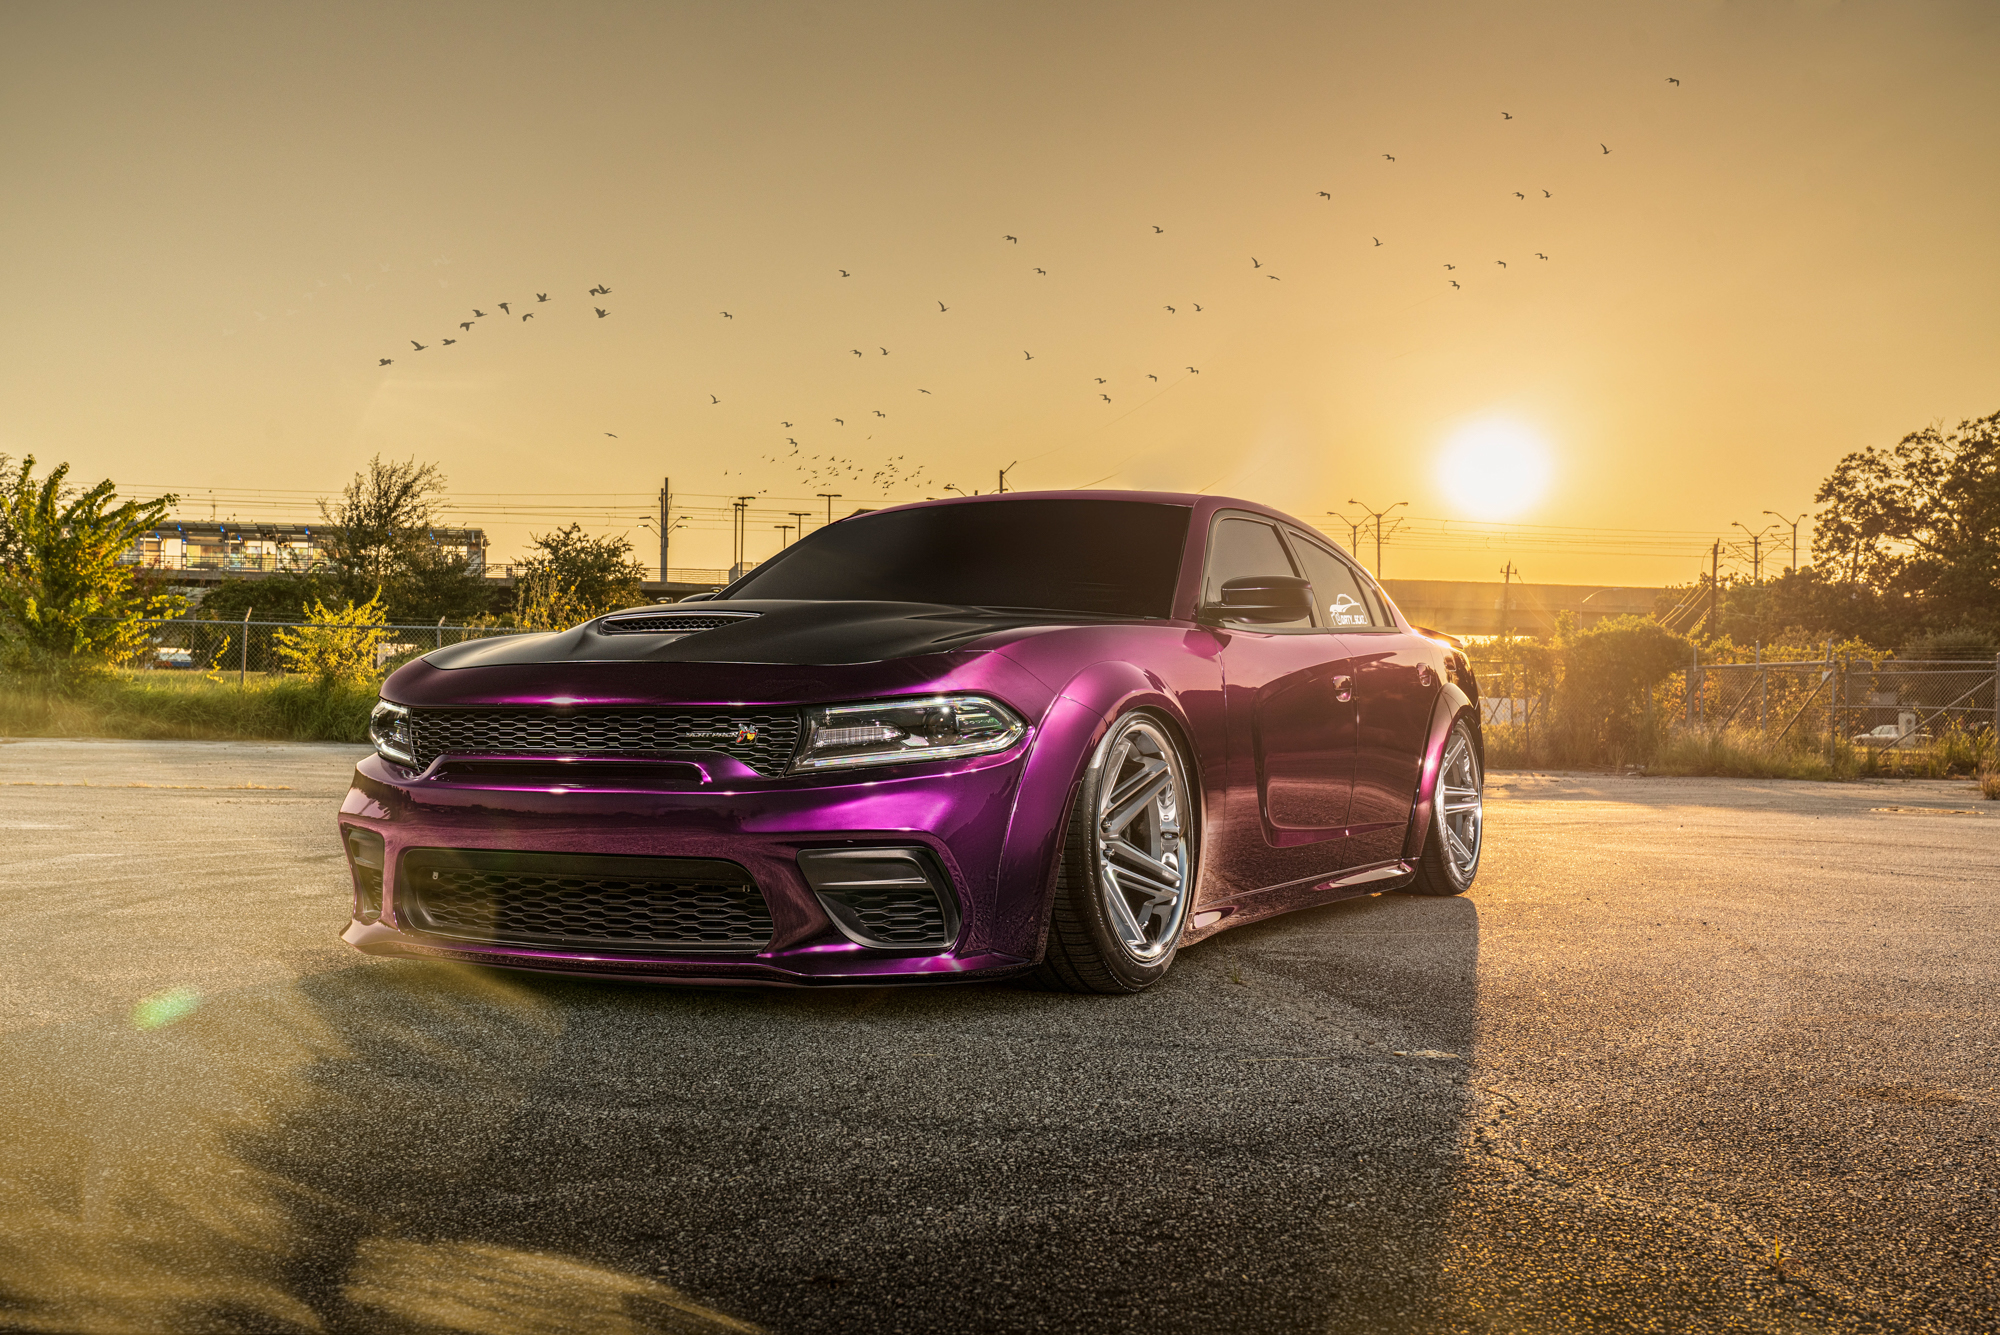 Dodge Charger Widebody (Purple) - DAF CM1 MS (2 of 8)